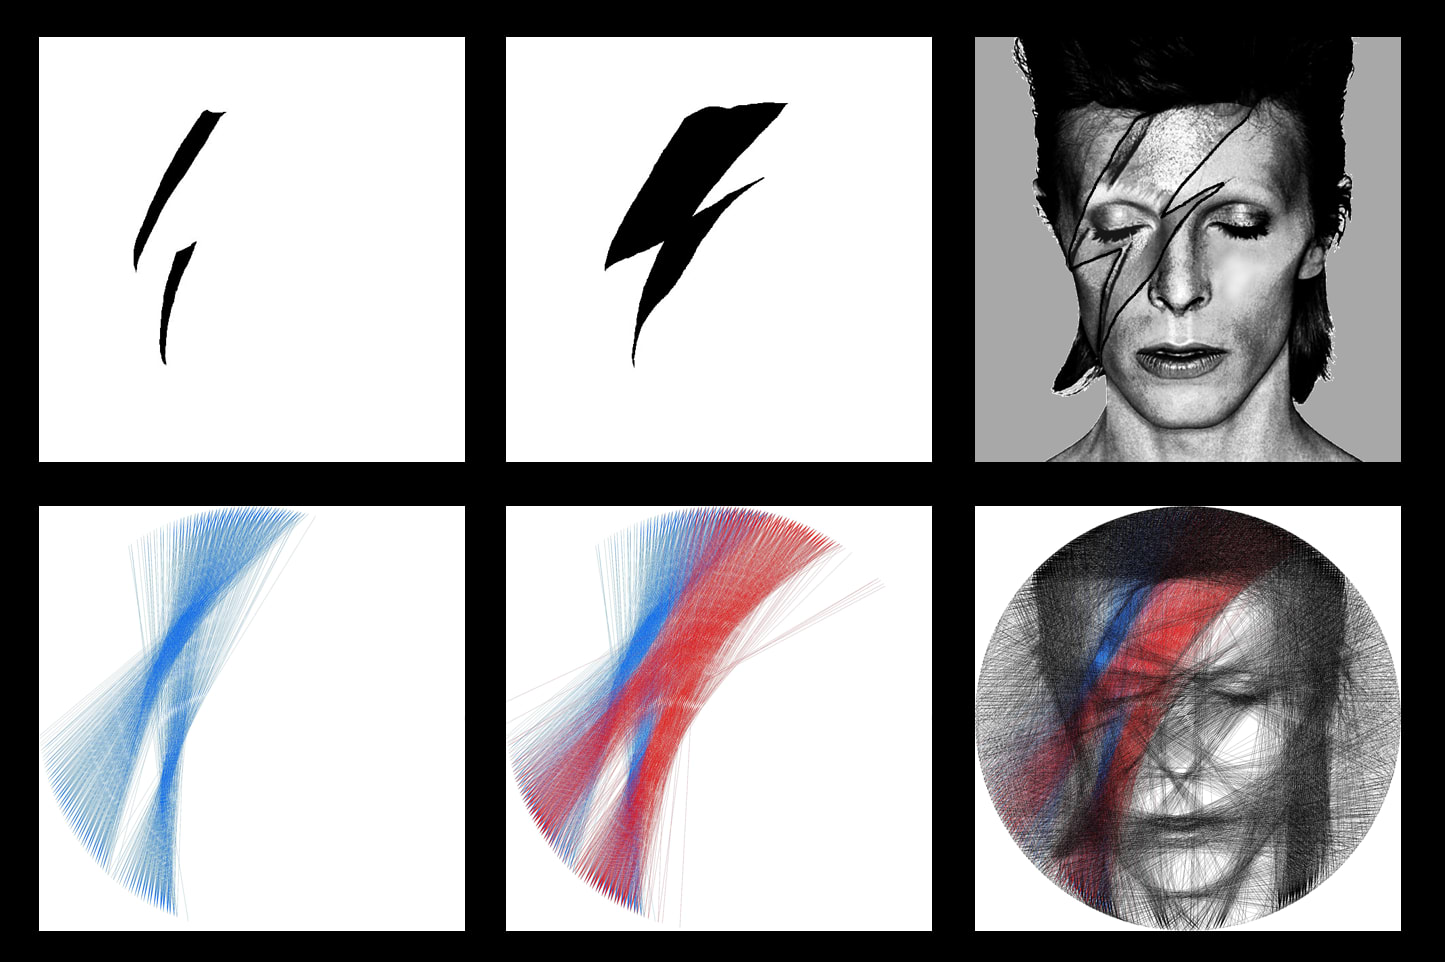 https://raw.githubusercontent.com/callummcdougall/computational-thread-art/master/example_images/misc/bowie-six.png